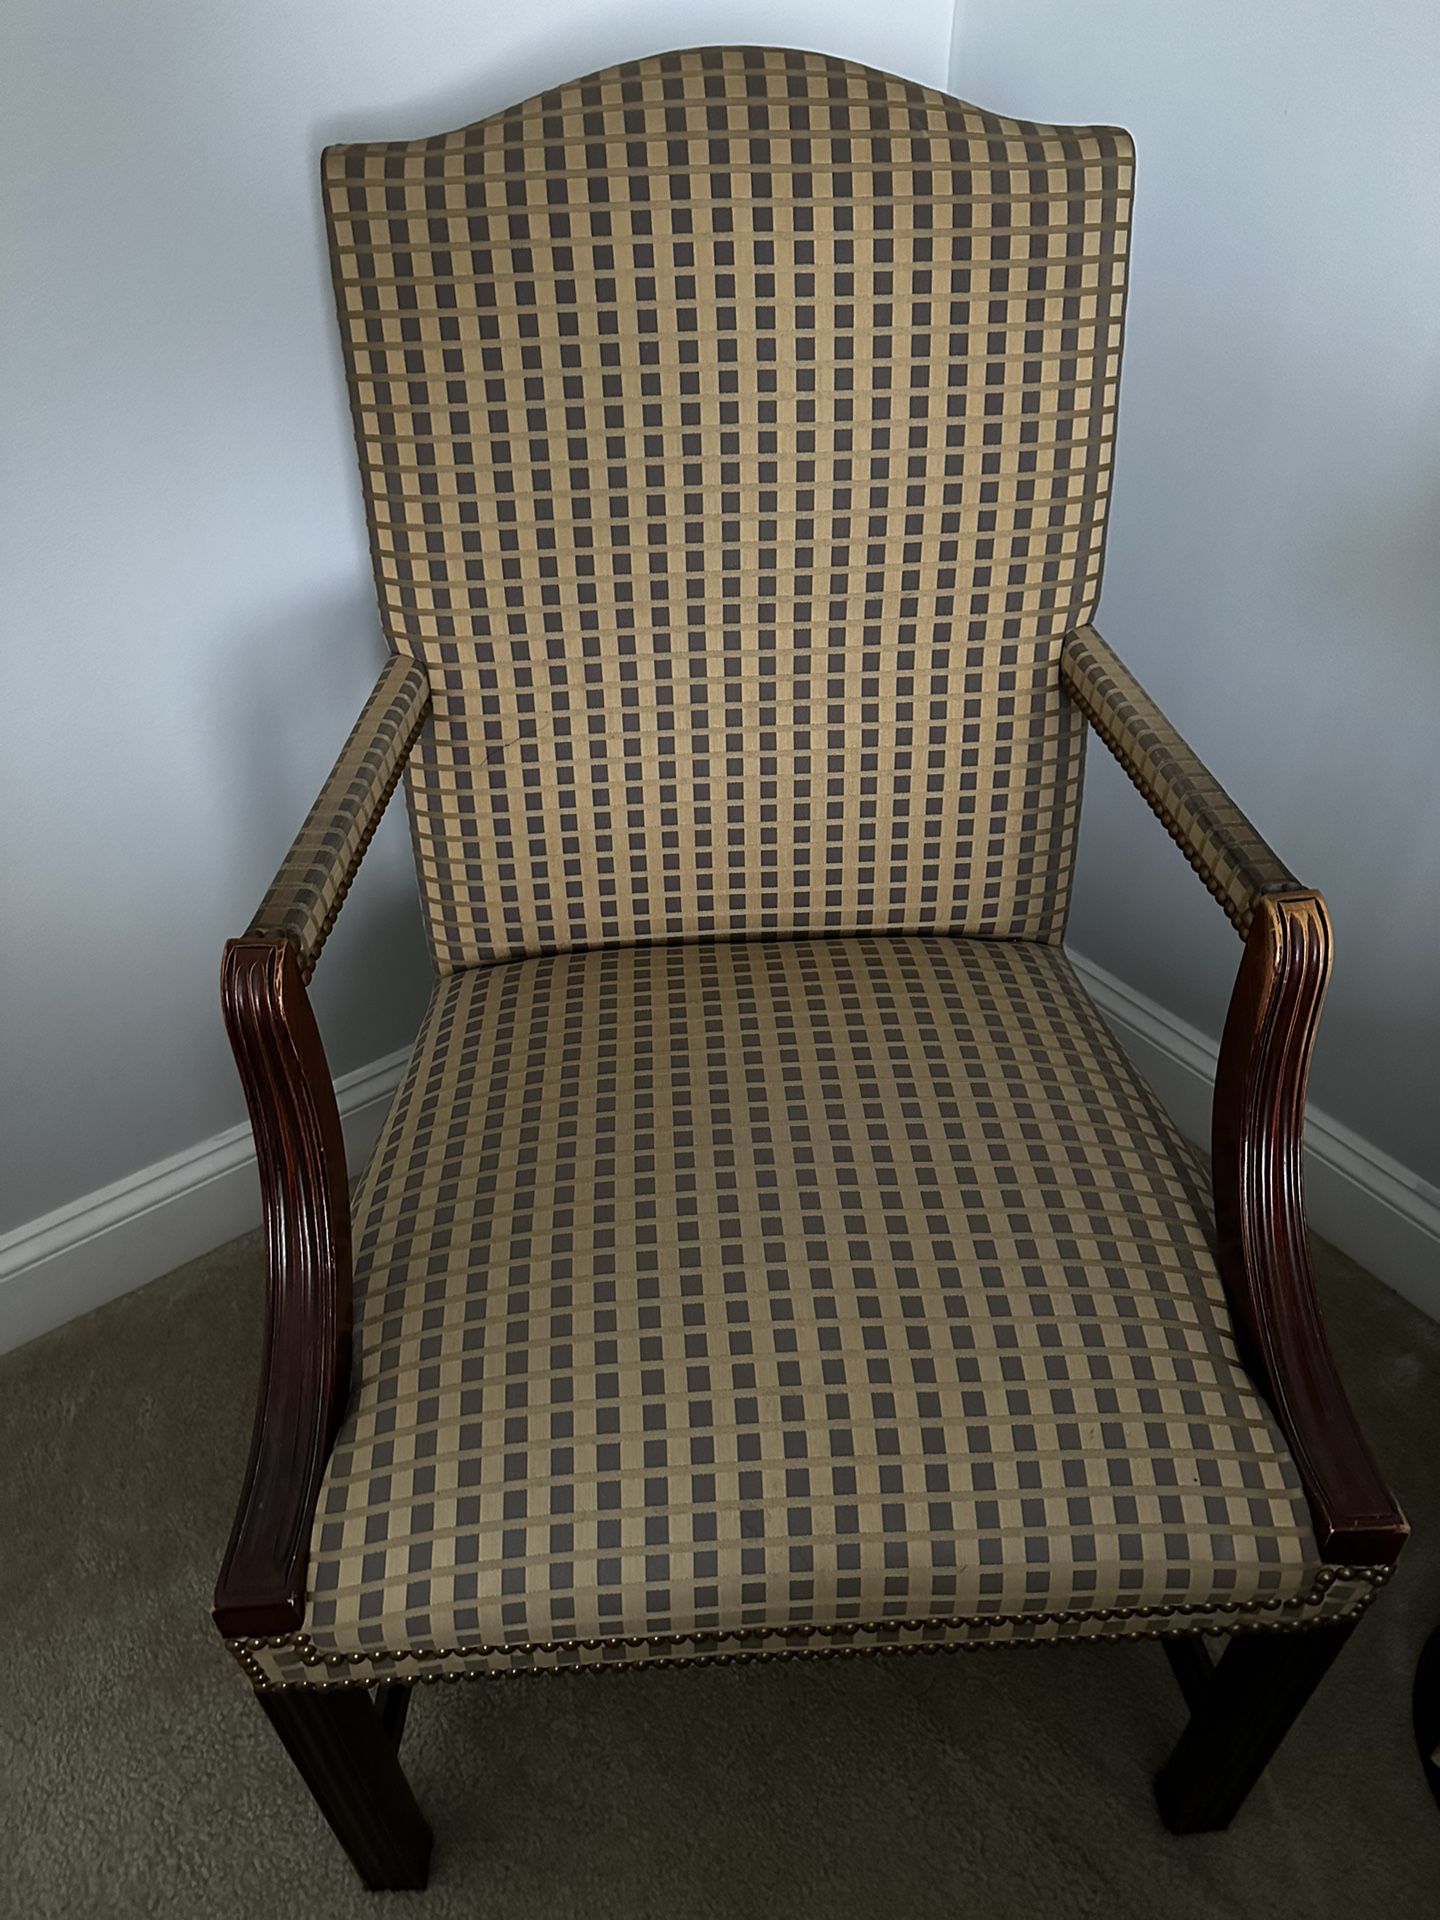 Selling two Vintage Chairs